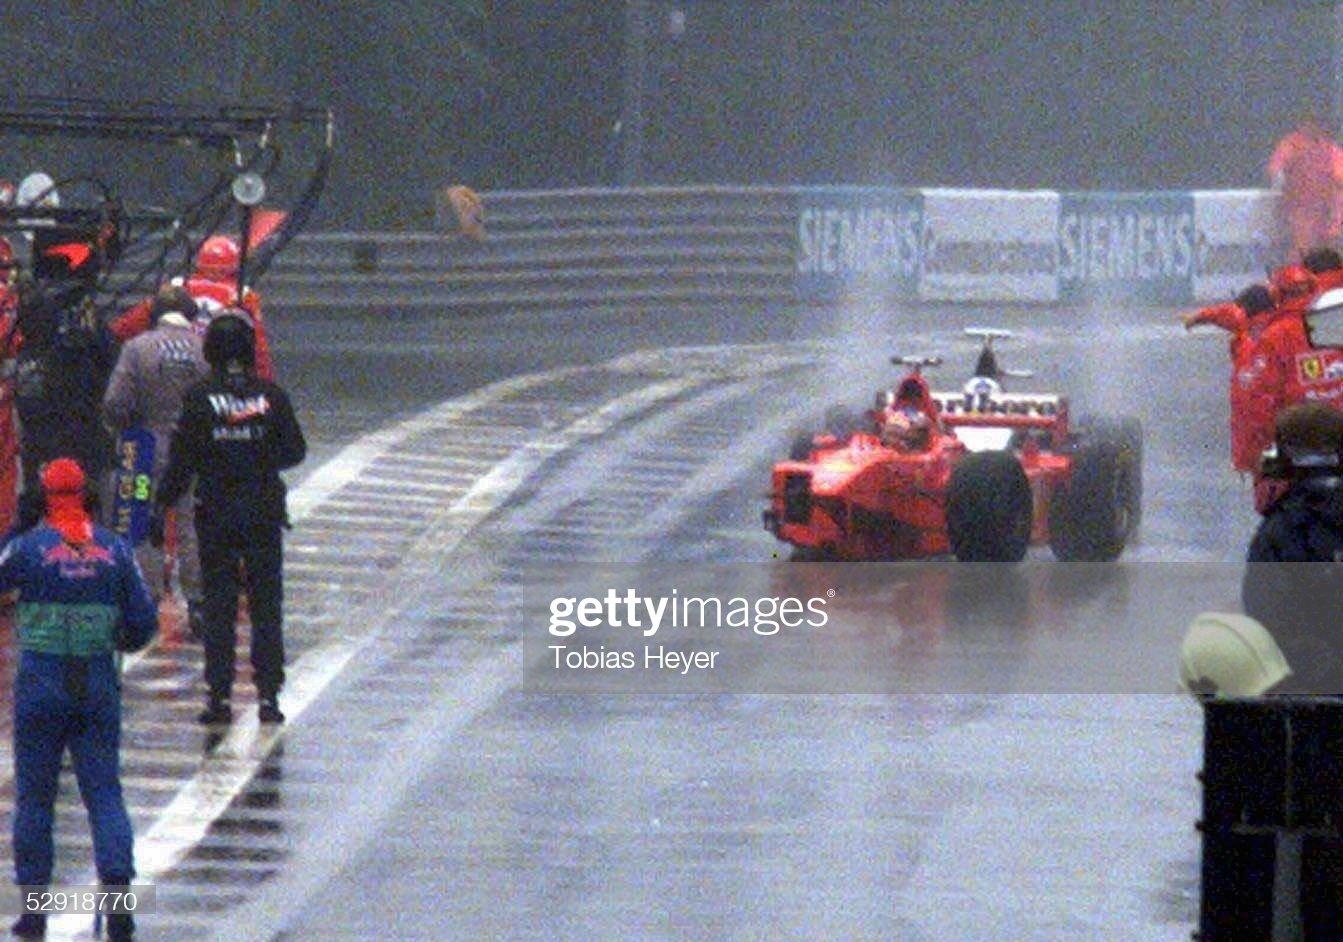 Michael Schumacher drives into the pits on three wheels in front of David Coulthard at the 1998 Belgian Grand Prix in Spa-Francorchamps.